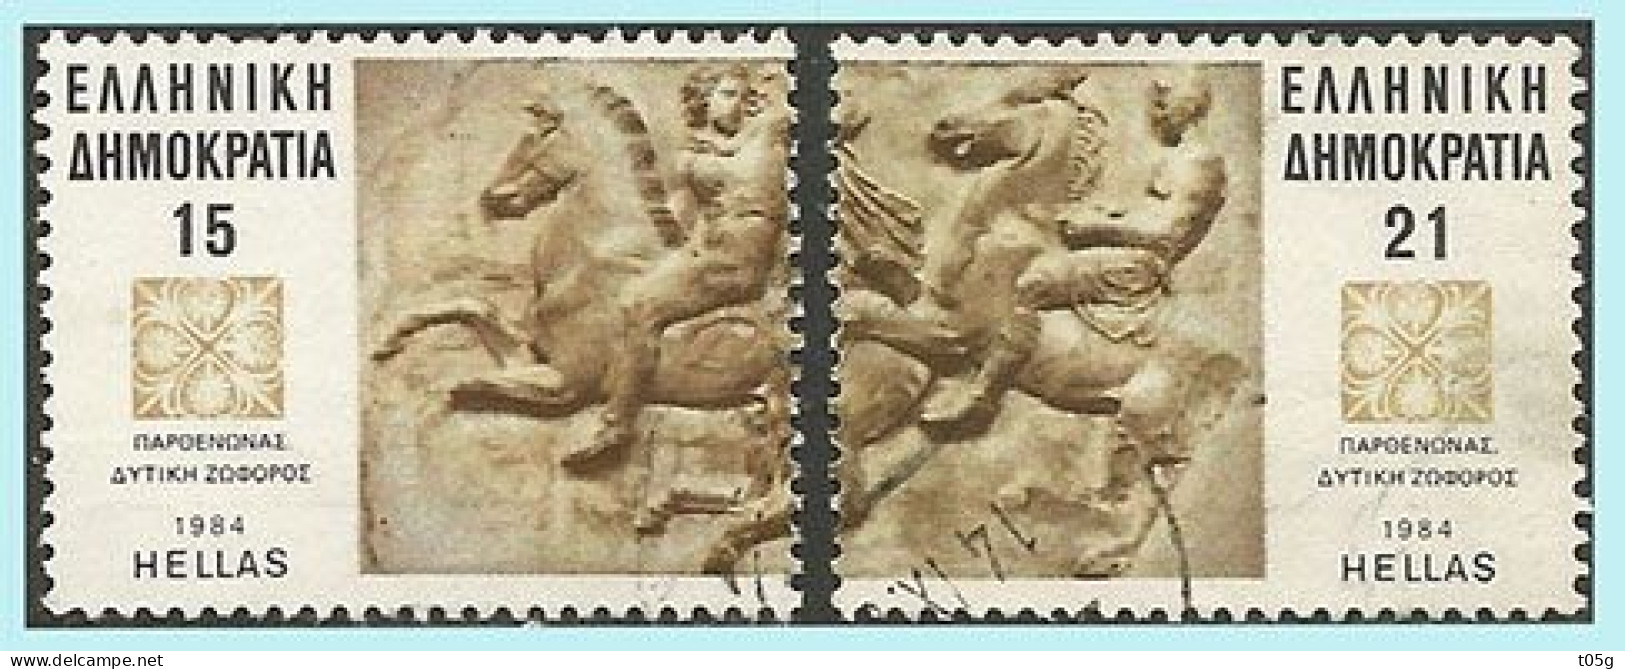 GREECE- GRECE- HELLAS 1984: 15+21drx  Marbles Of The Parhenon From  Miniature Sheet Used - Used Stamps